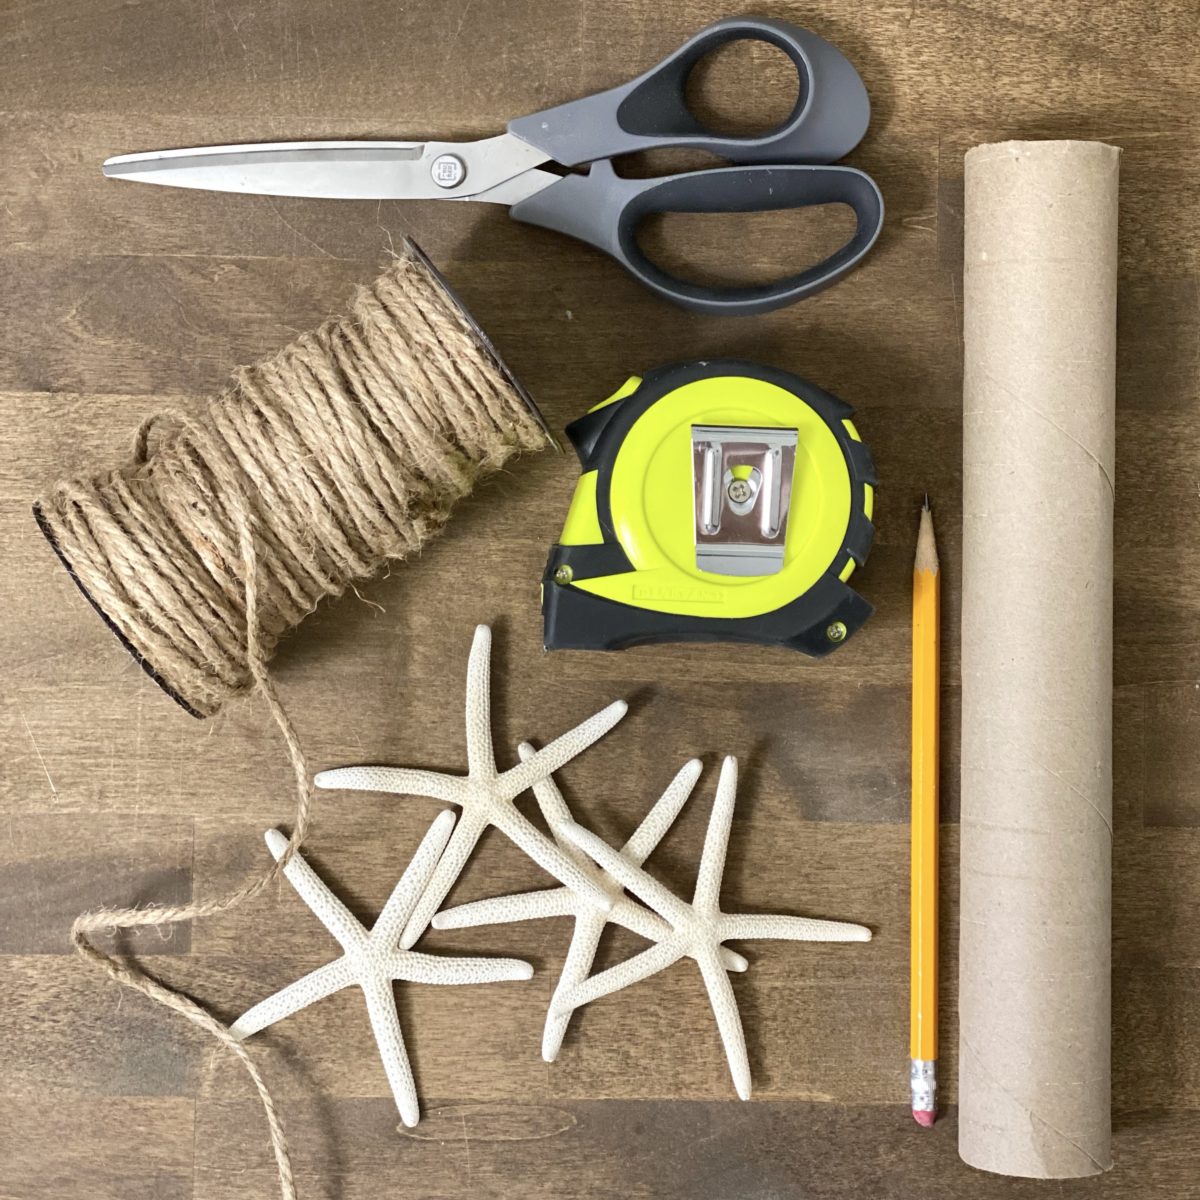 Materials needed to make casual DIY coastal napkin rings including cardboard center to paper towel roll, measuring tape, pencil, twine, scissor, and starfish.